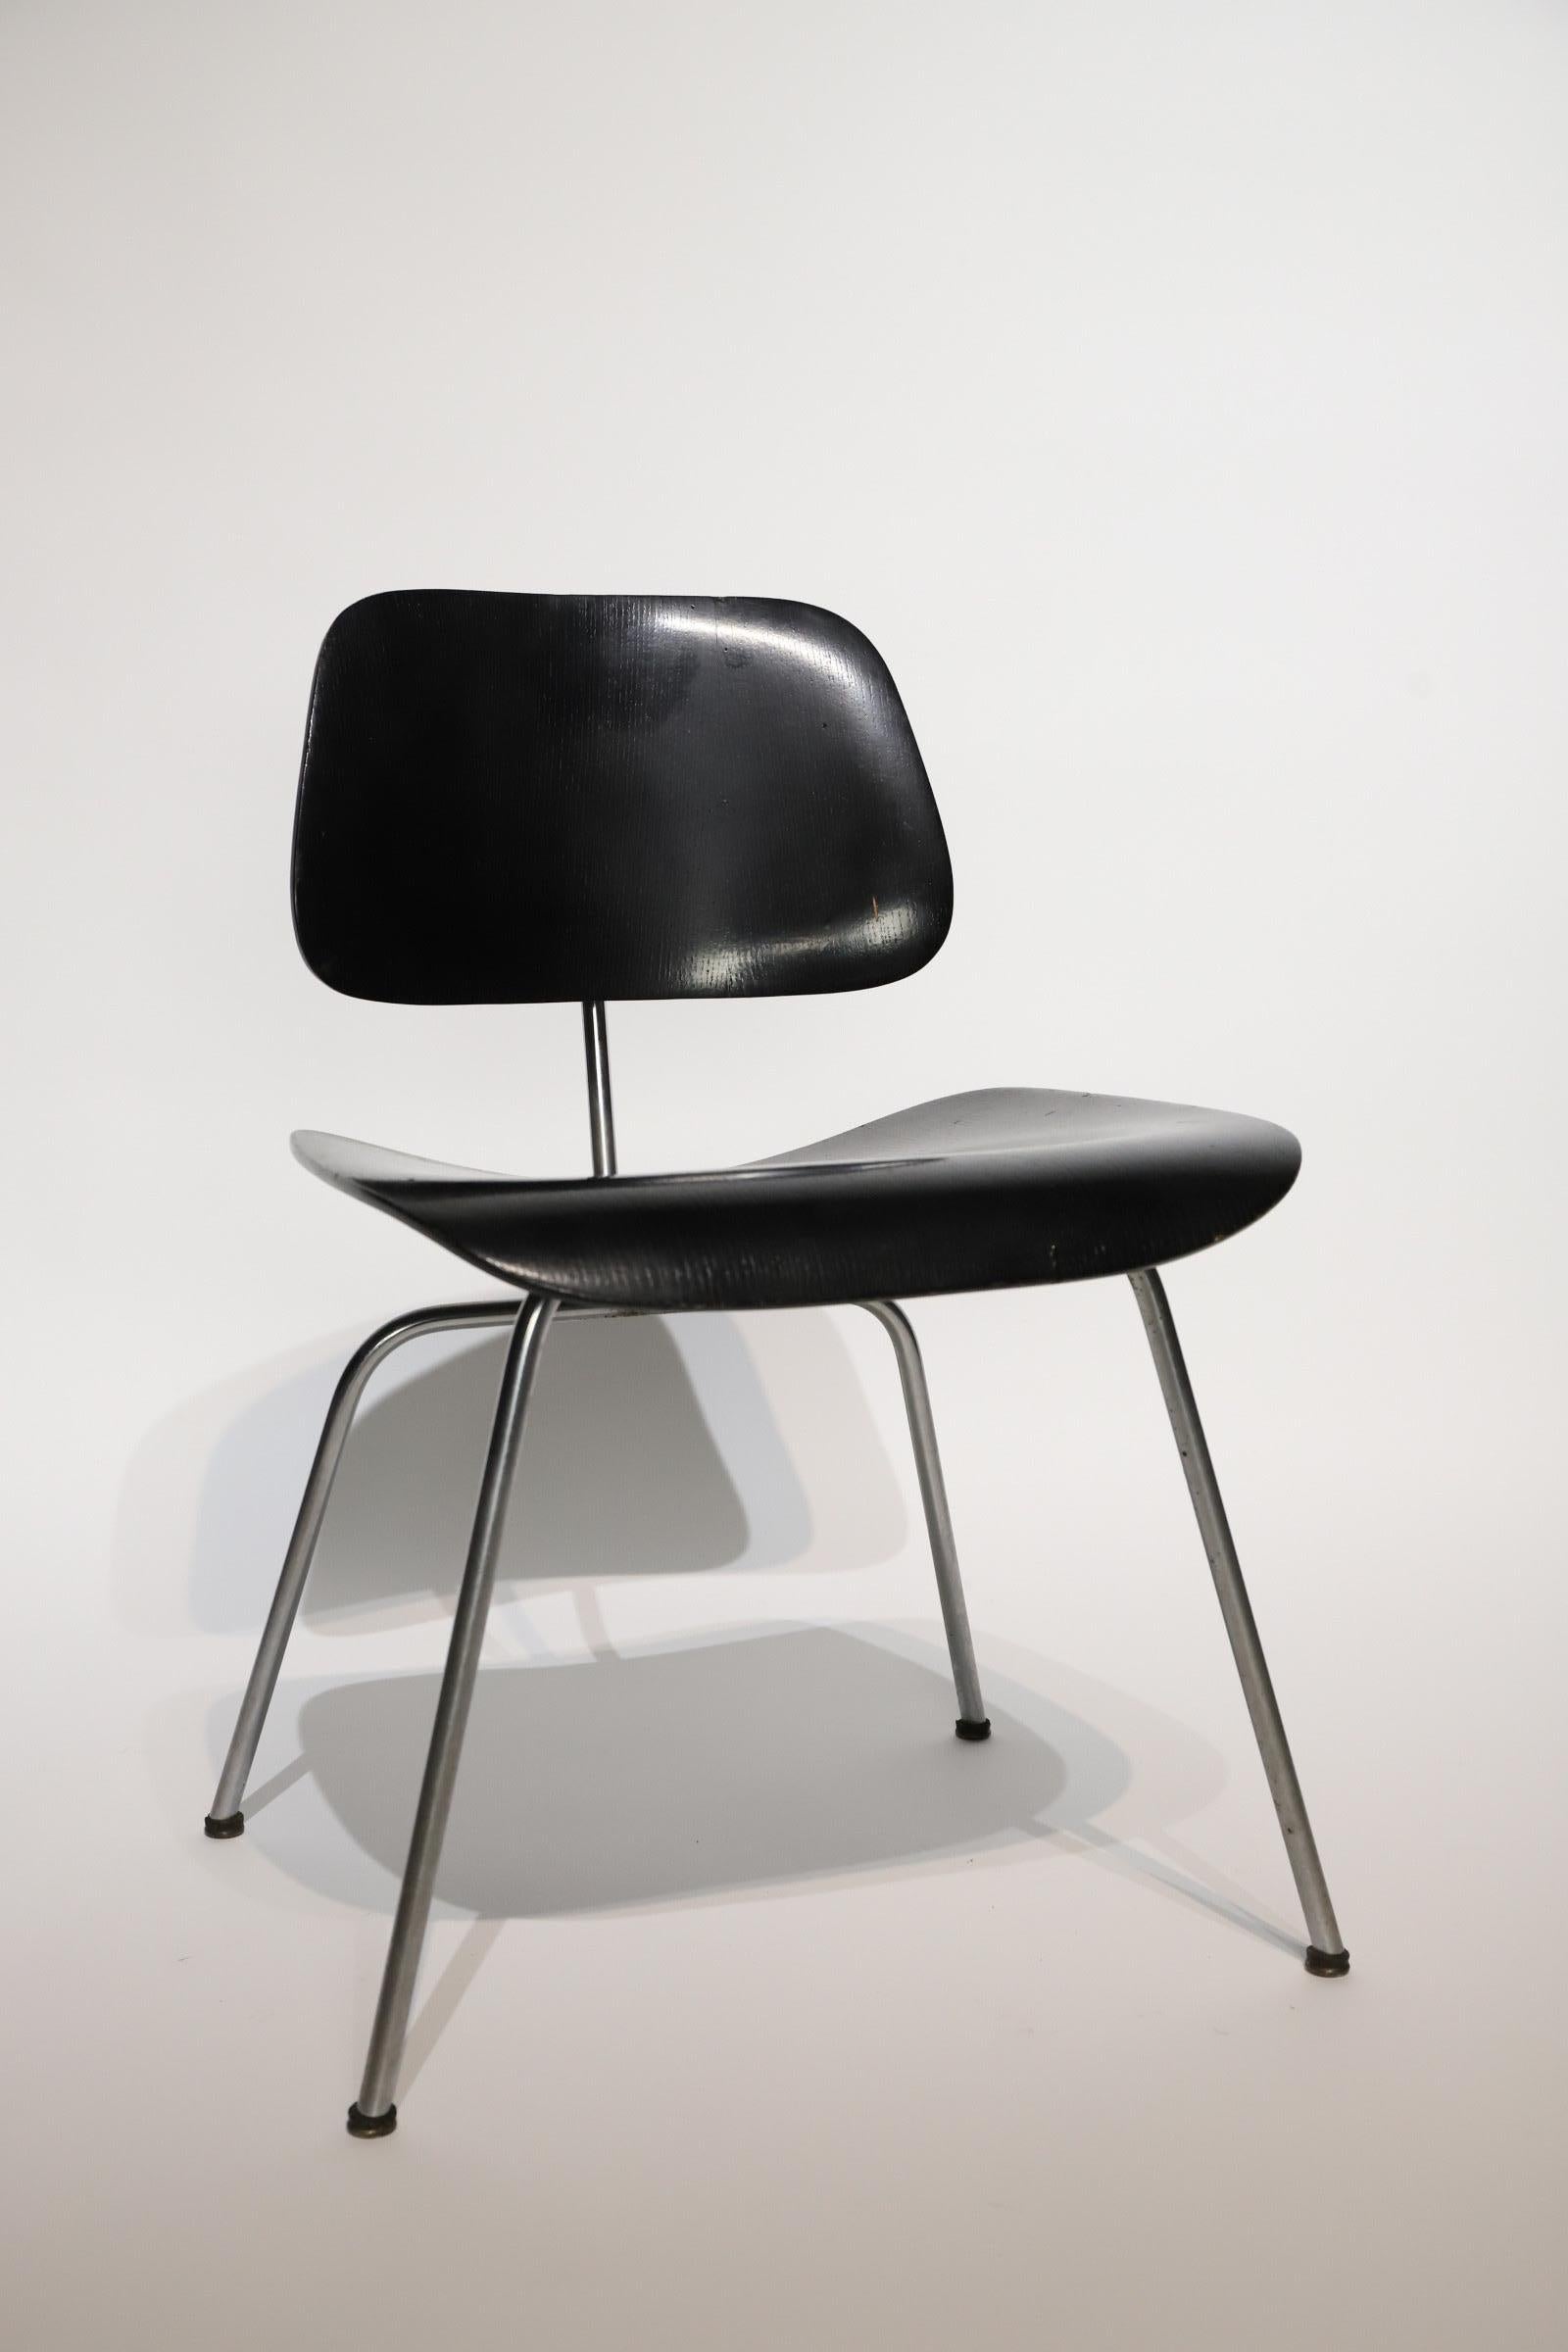 Early aniline dyed black Eames DCM for Herman Miller. Photographed with Cappellini side table and Noguchi lamp for scale. 